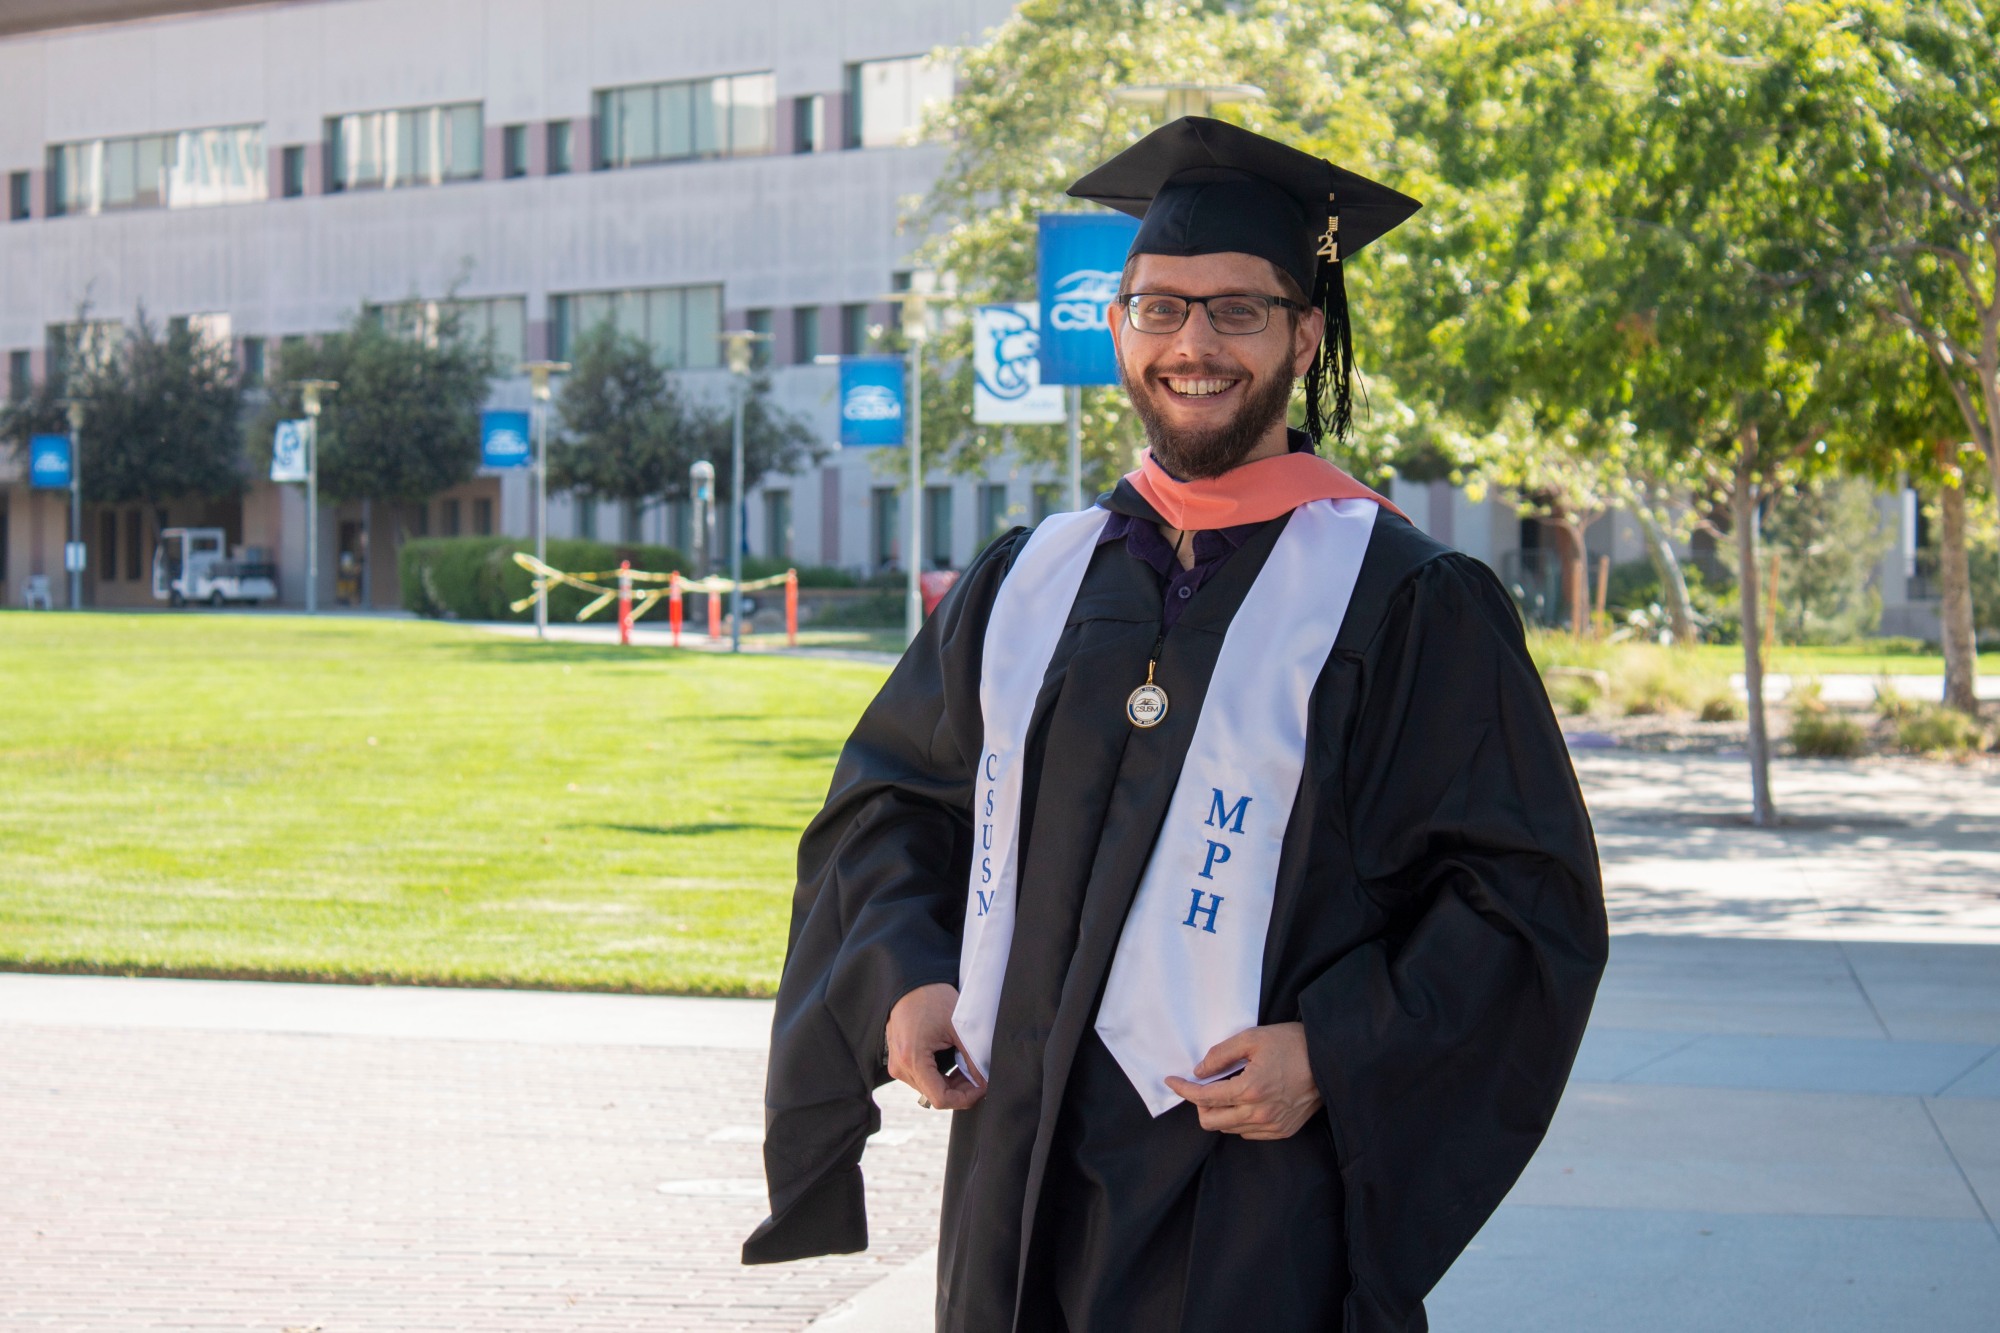 Rick J Nash in his graduation cap and gown on campus at CSUSM also wearing his MPH stole and hood.